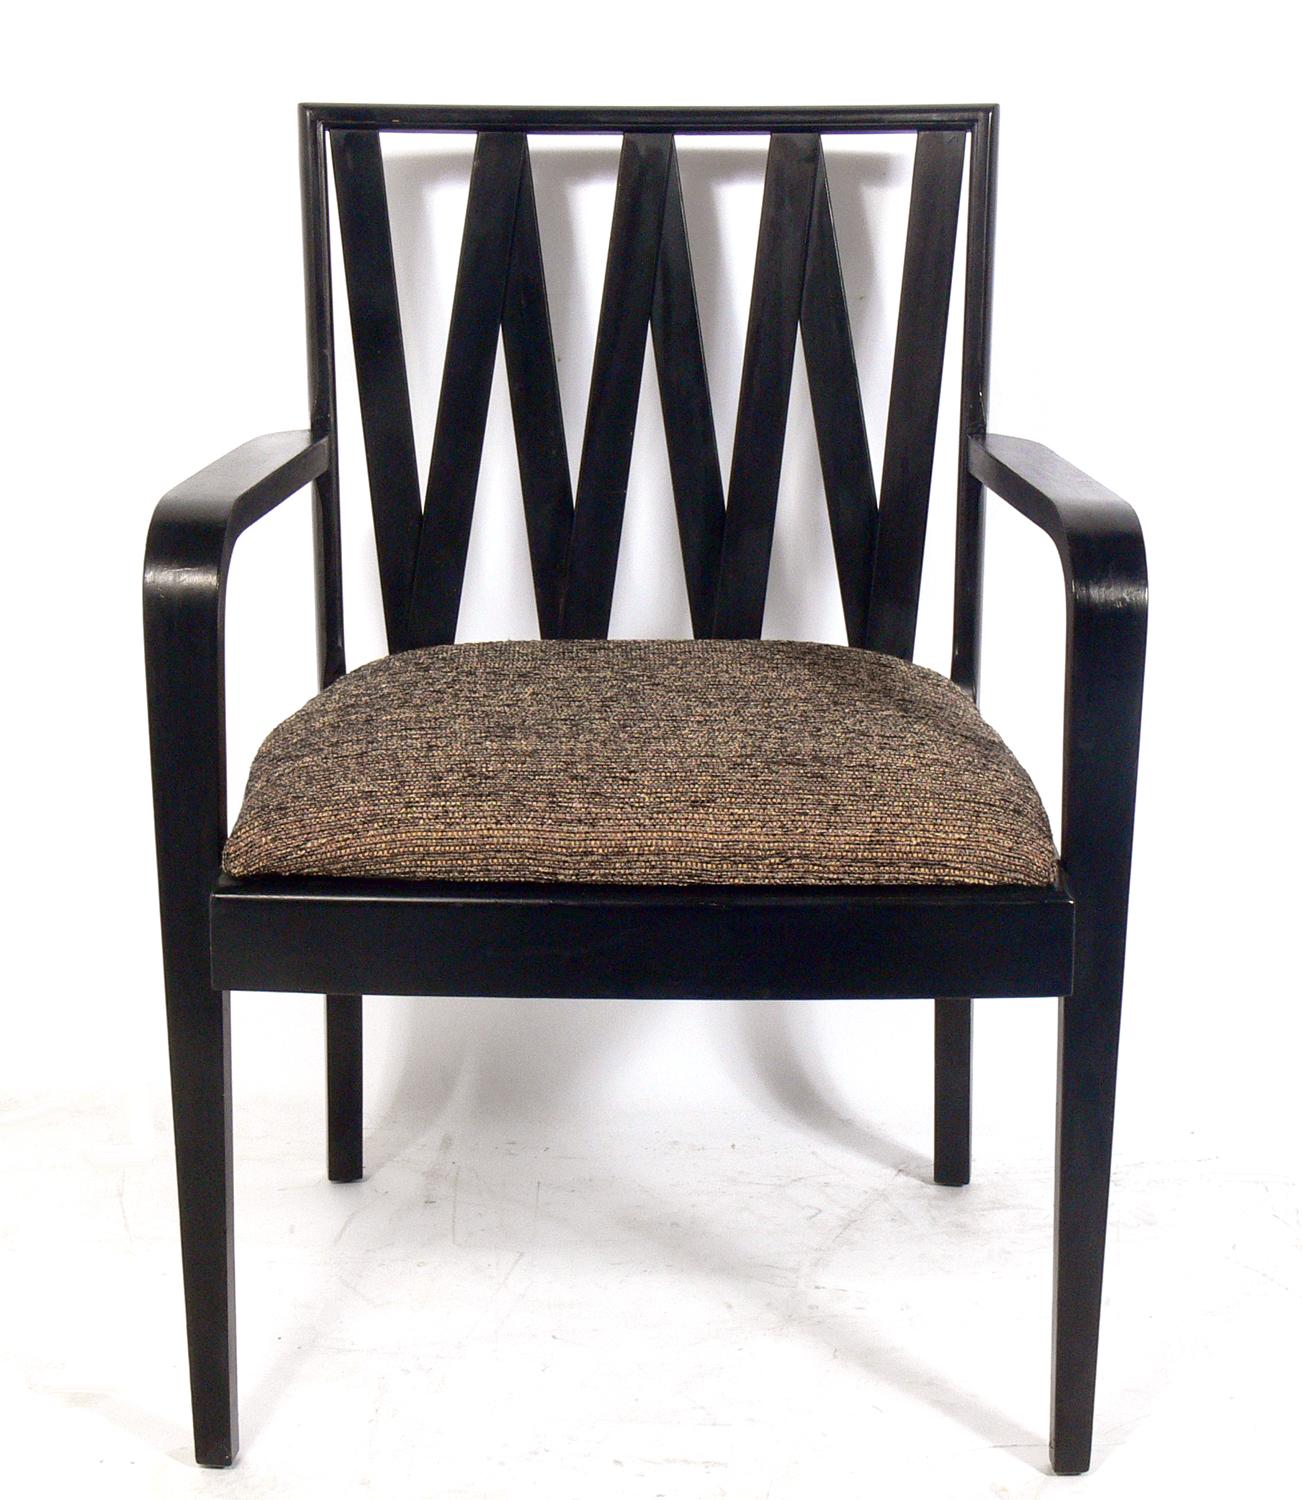 Set of six dining chairs, designed by Paul Frankl for The Johnson Furniture Company, American, circa 1940s. These chairs are currently being refinished and reupholstered. The price noted below includes refinishing in your choice of color and